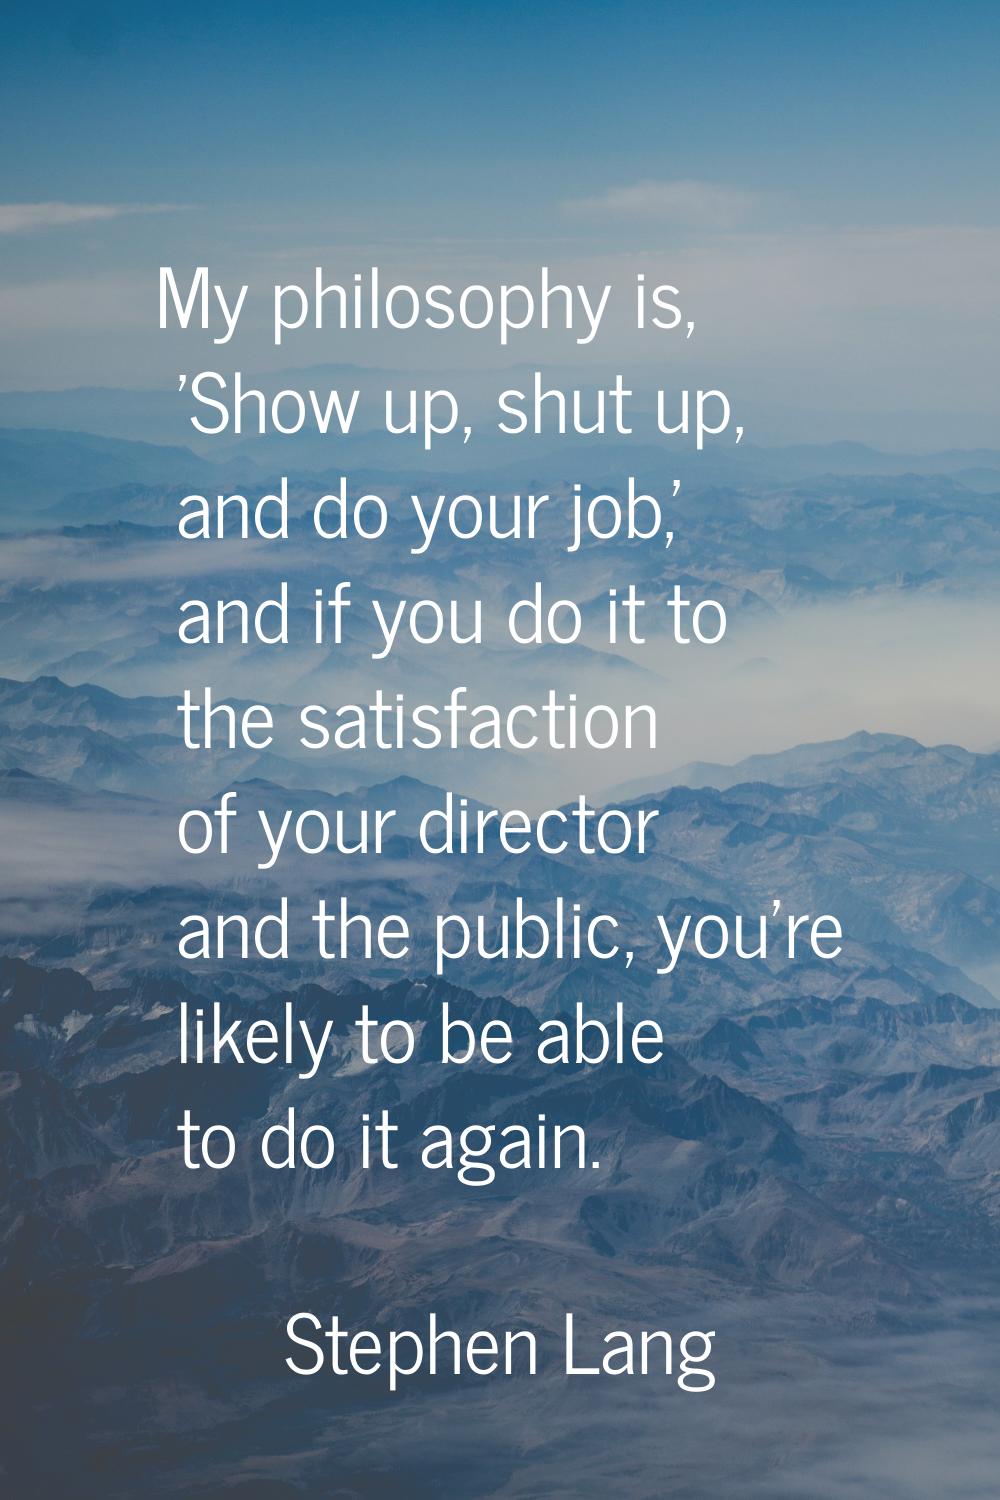 My philosophy is, 'Show up, shut up, and do your job,' and if you do it to the satisfaction of your